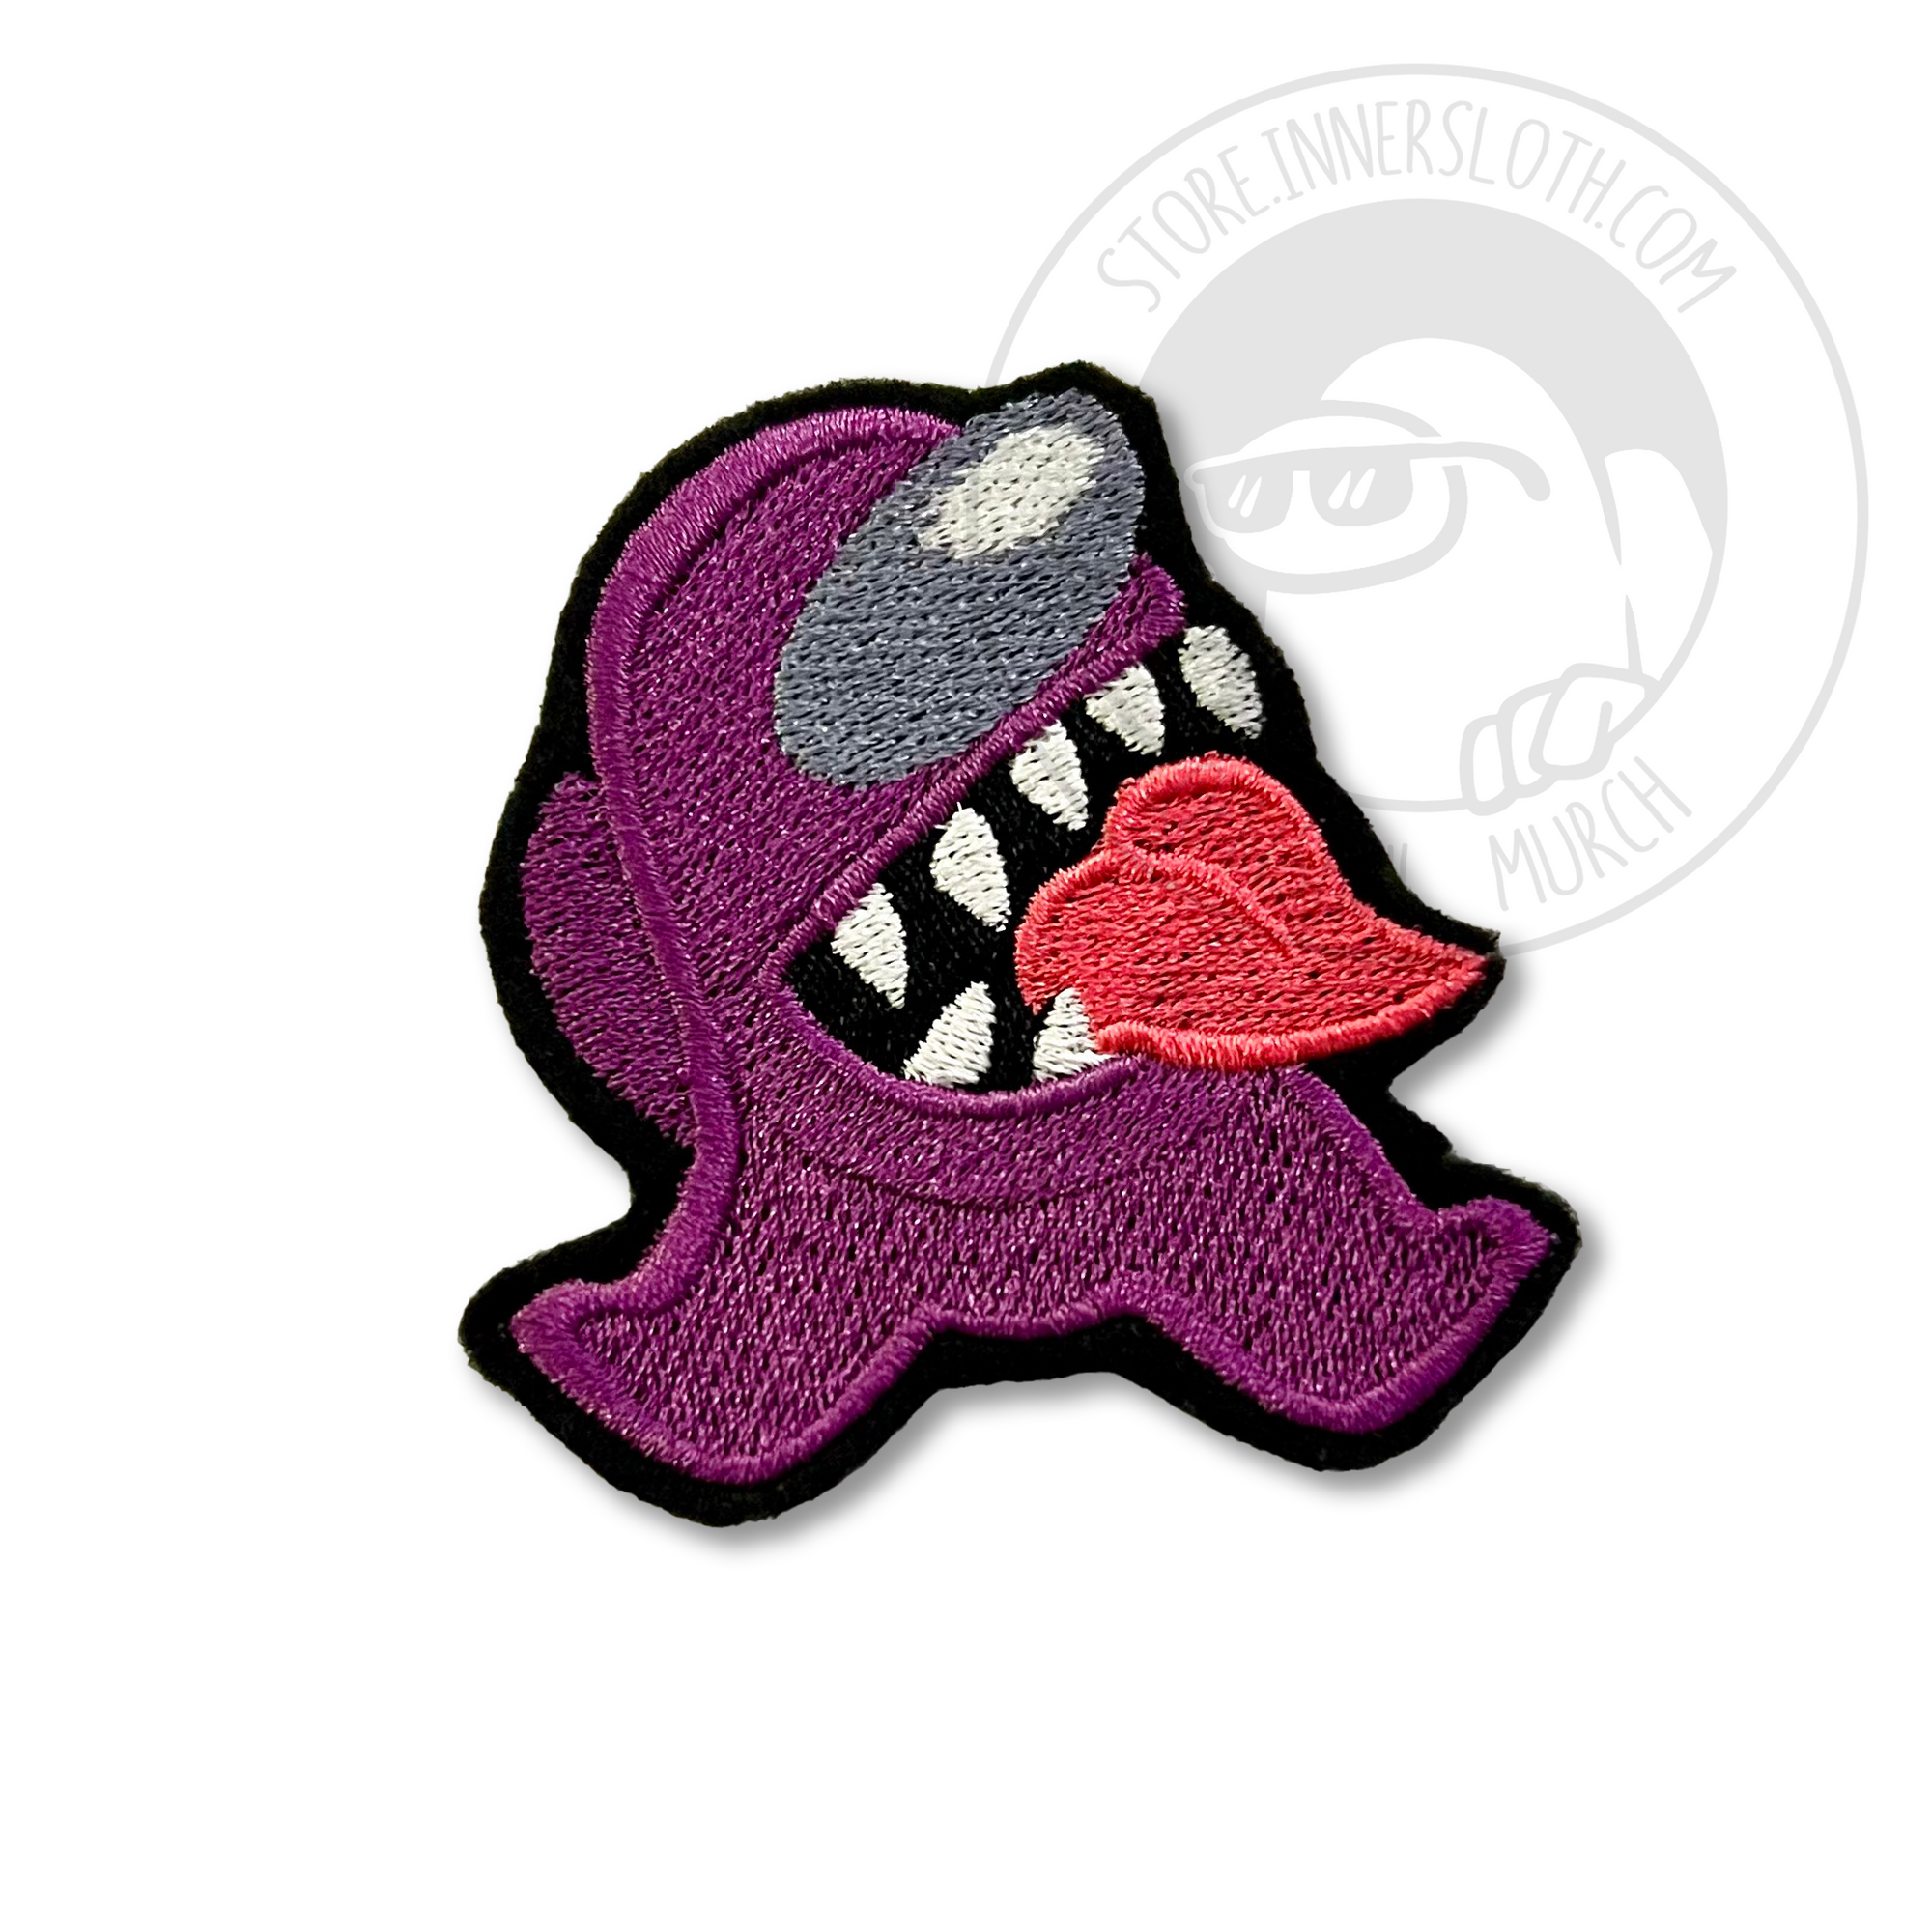 A product photo of a stylized purple Imposter patch, with grinning sharp teeth and a red tongue. Its legs splay out to the sides.